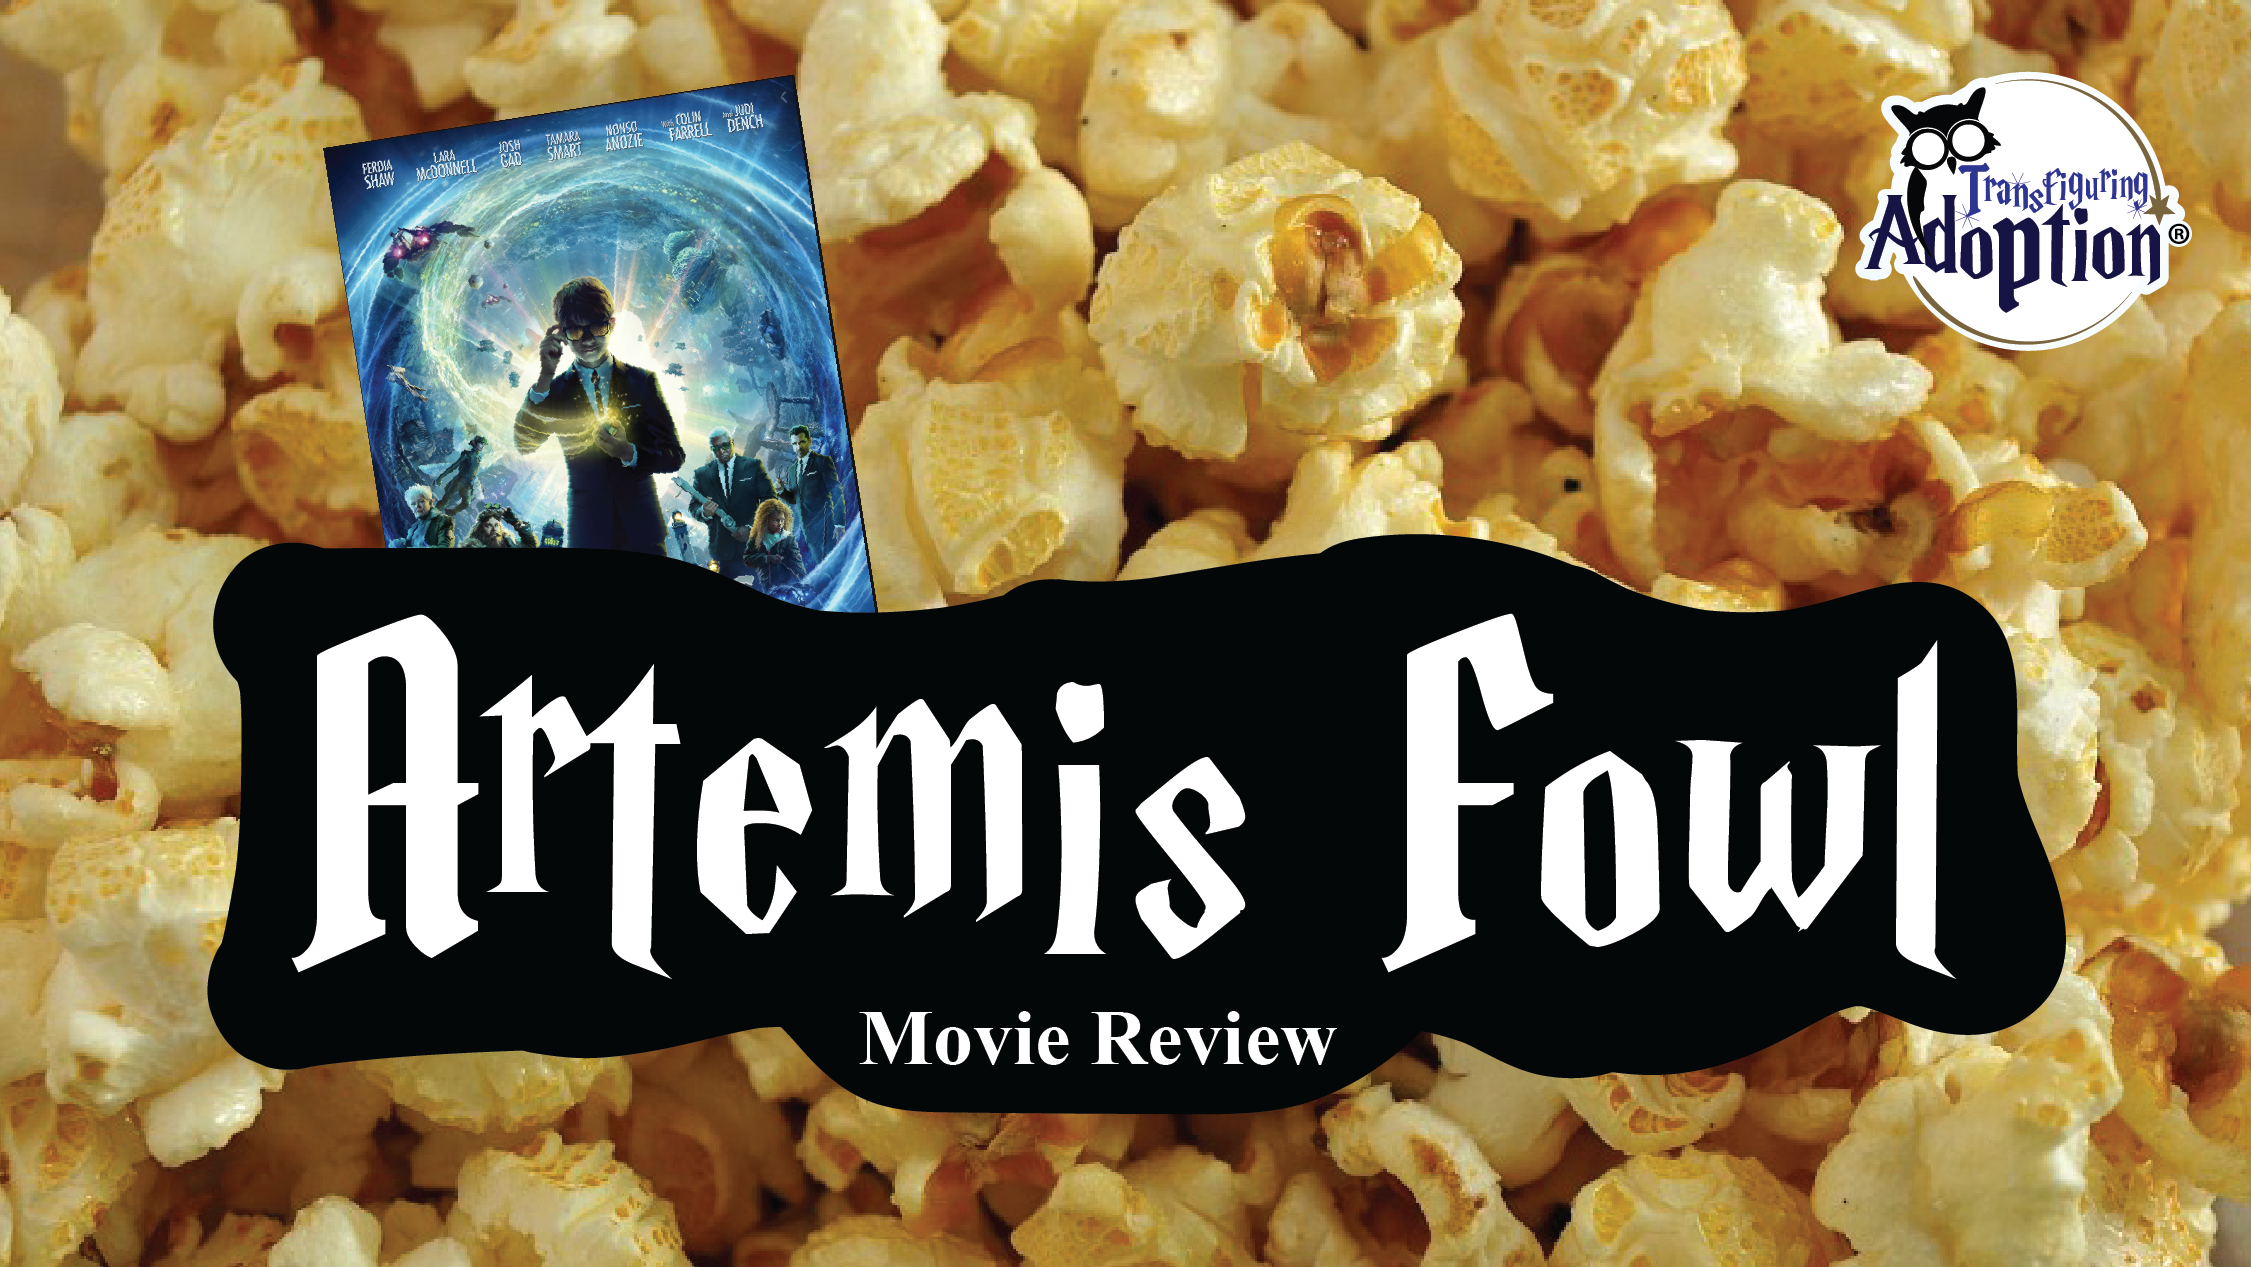 Watch or Pass: Review: Artemis Fowl